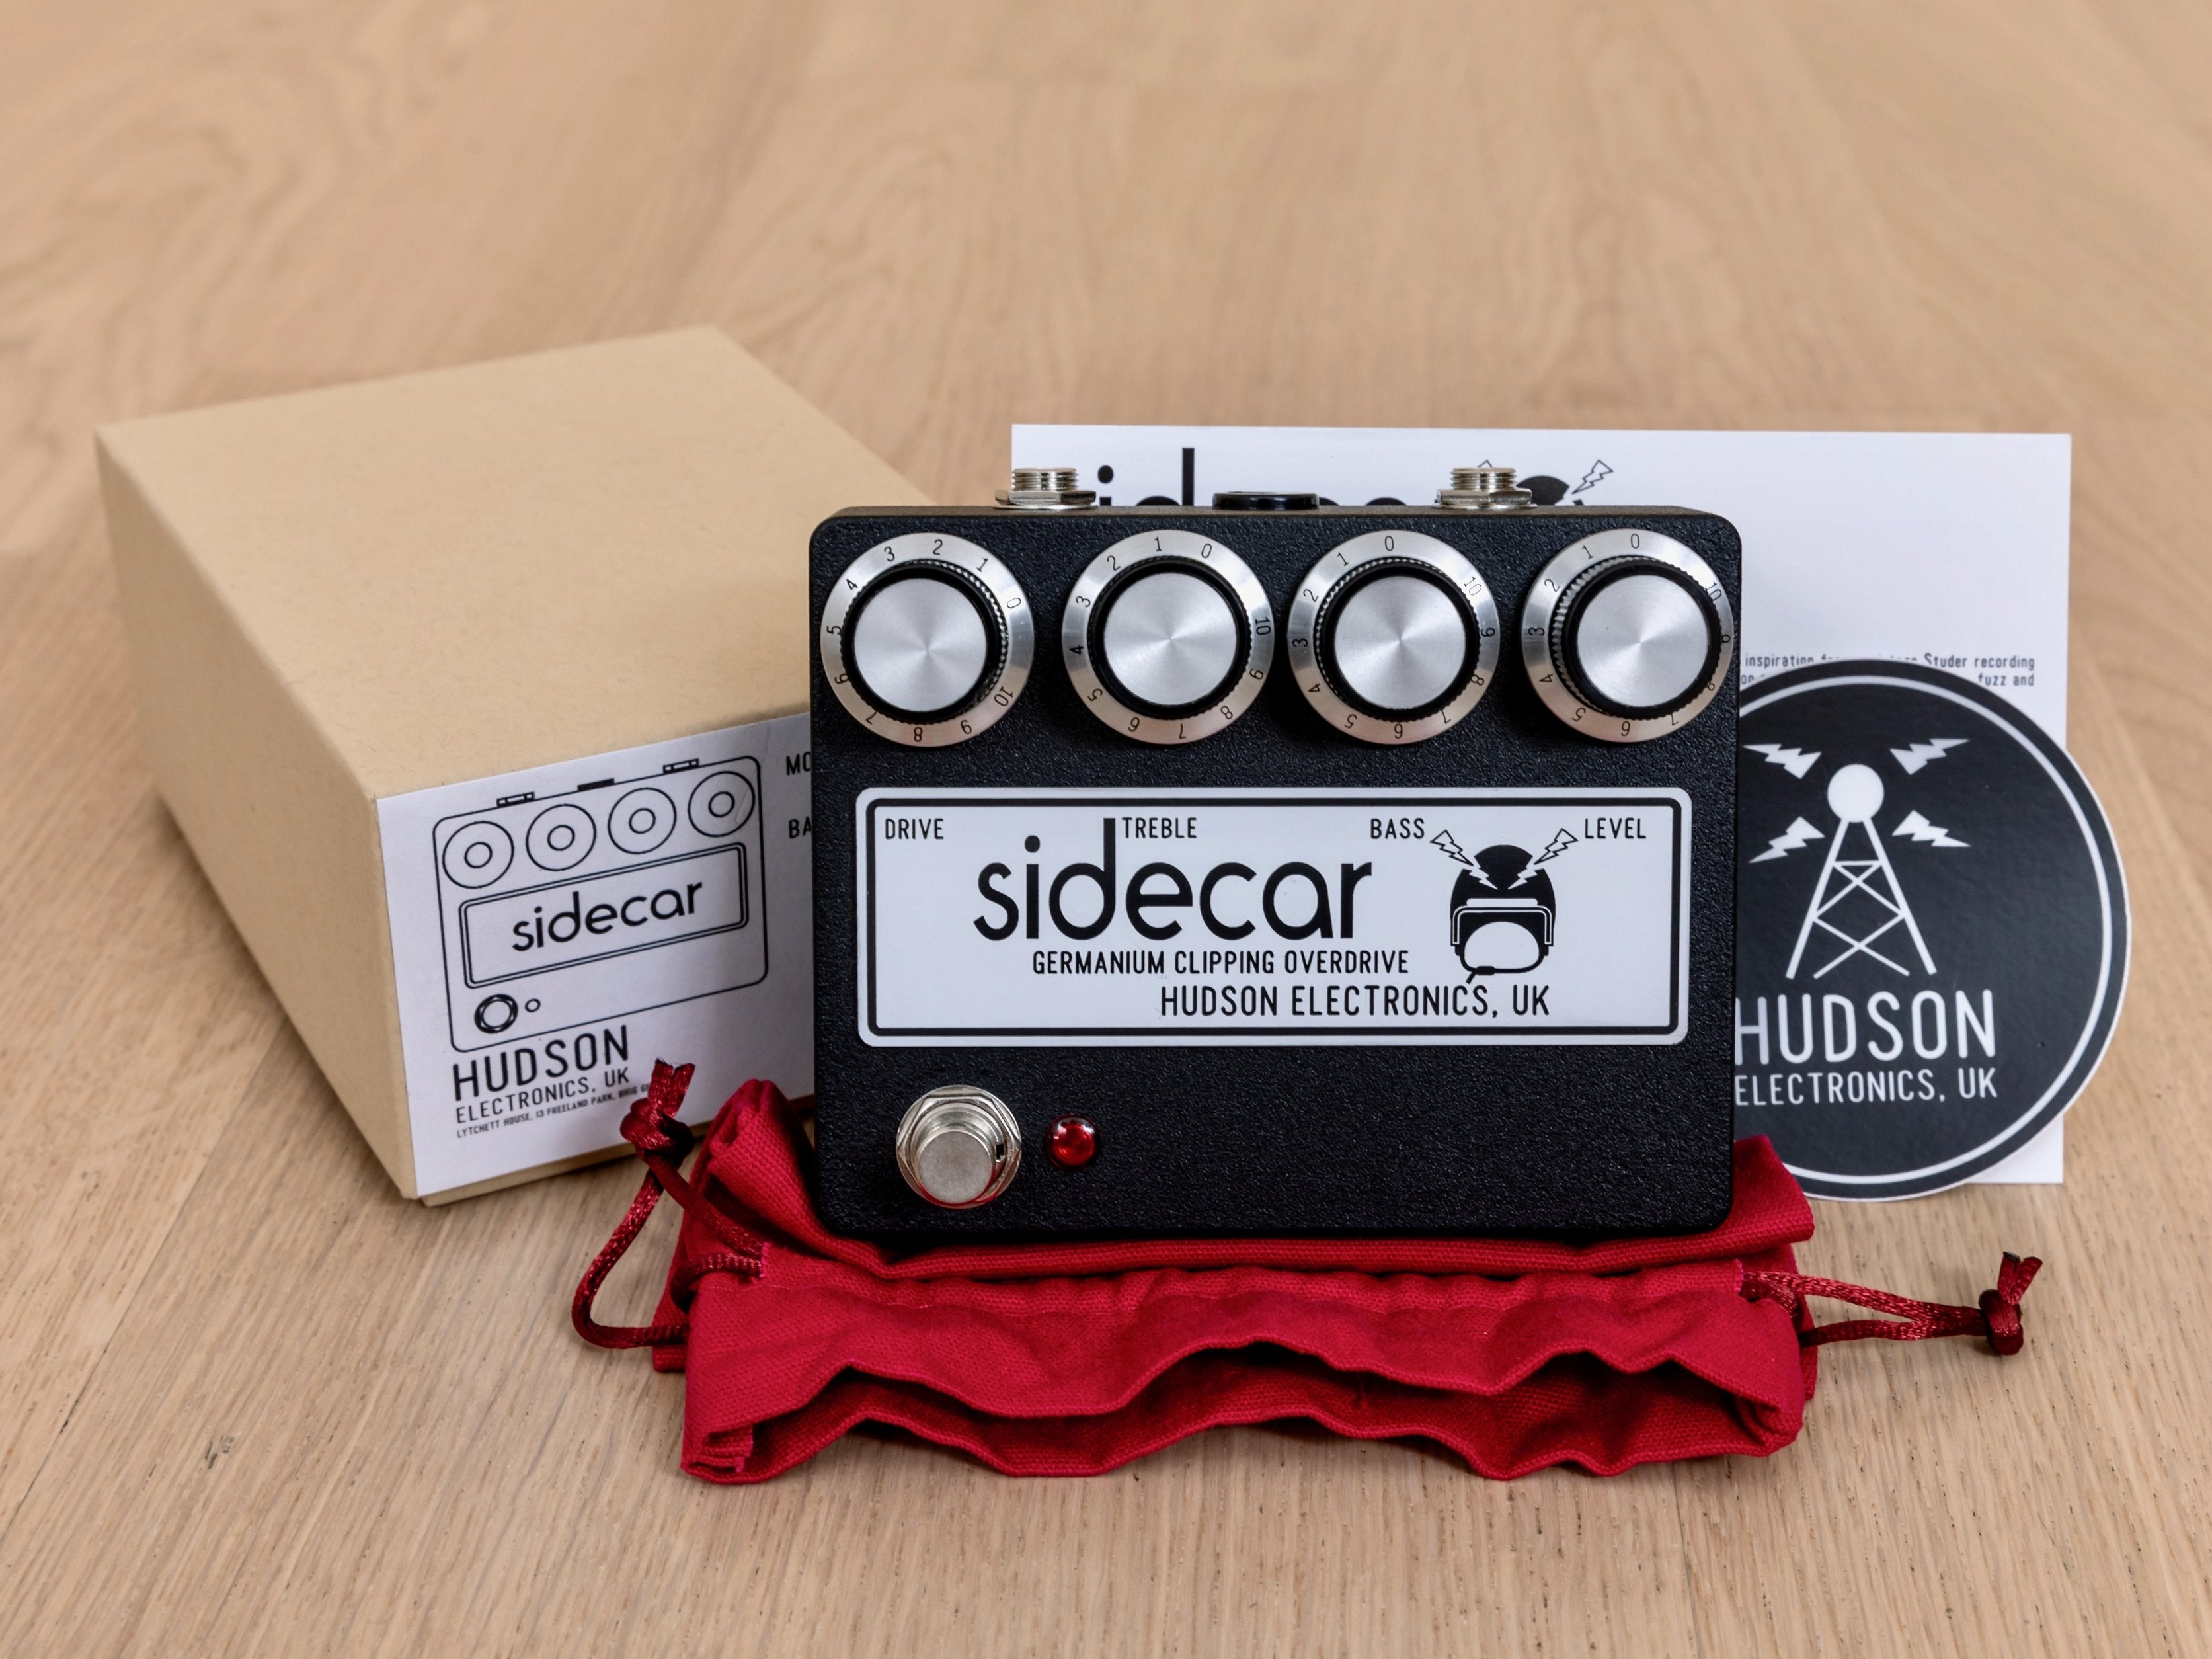 Hudson Electronics UK Sidecar Overdrive 808-Style Boutique Guitar Effects Pedal